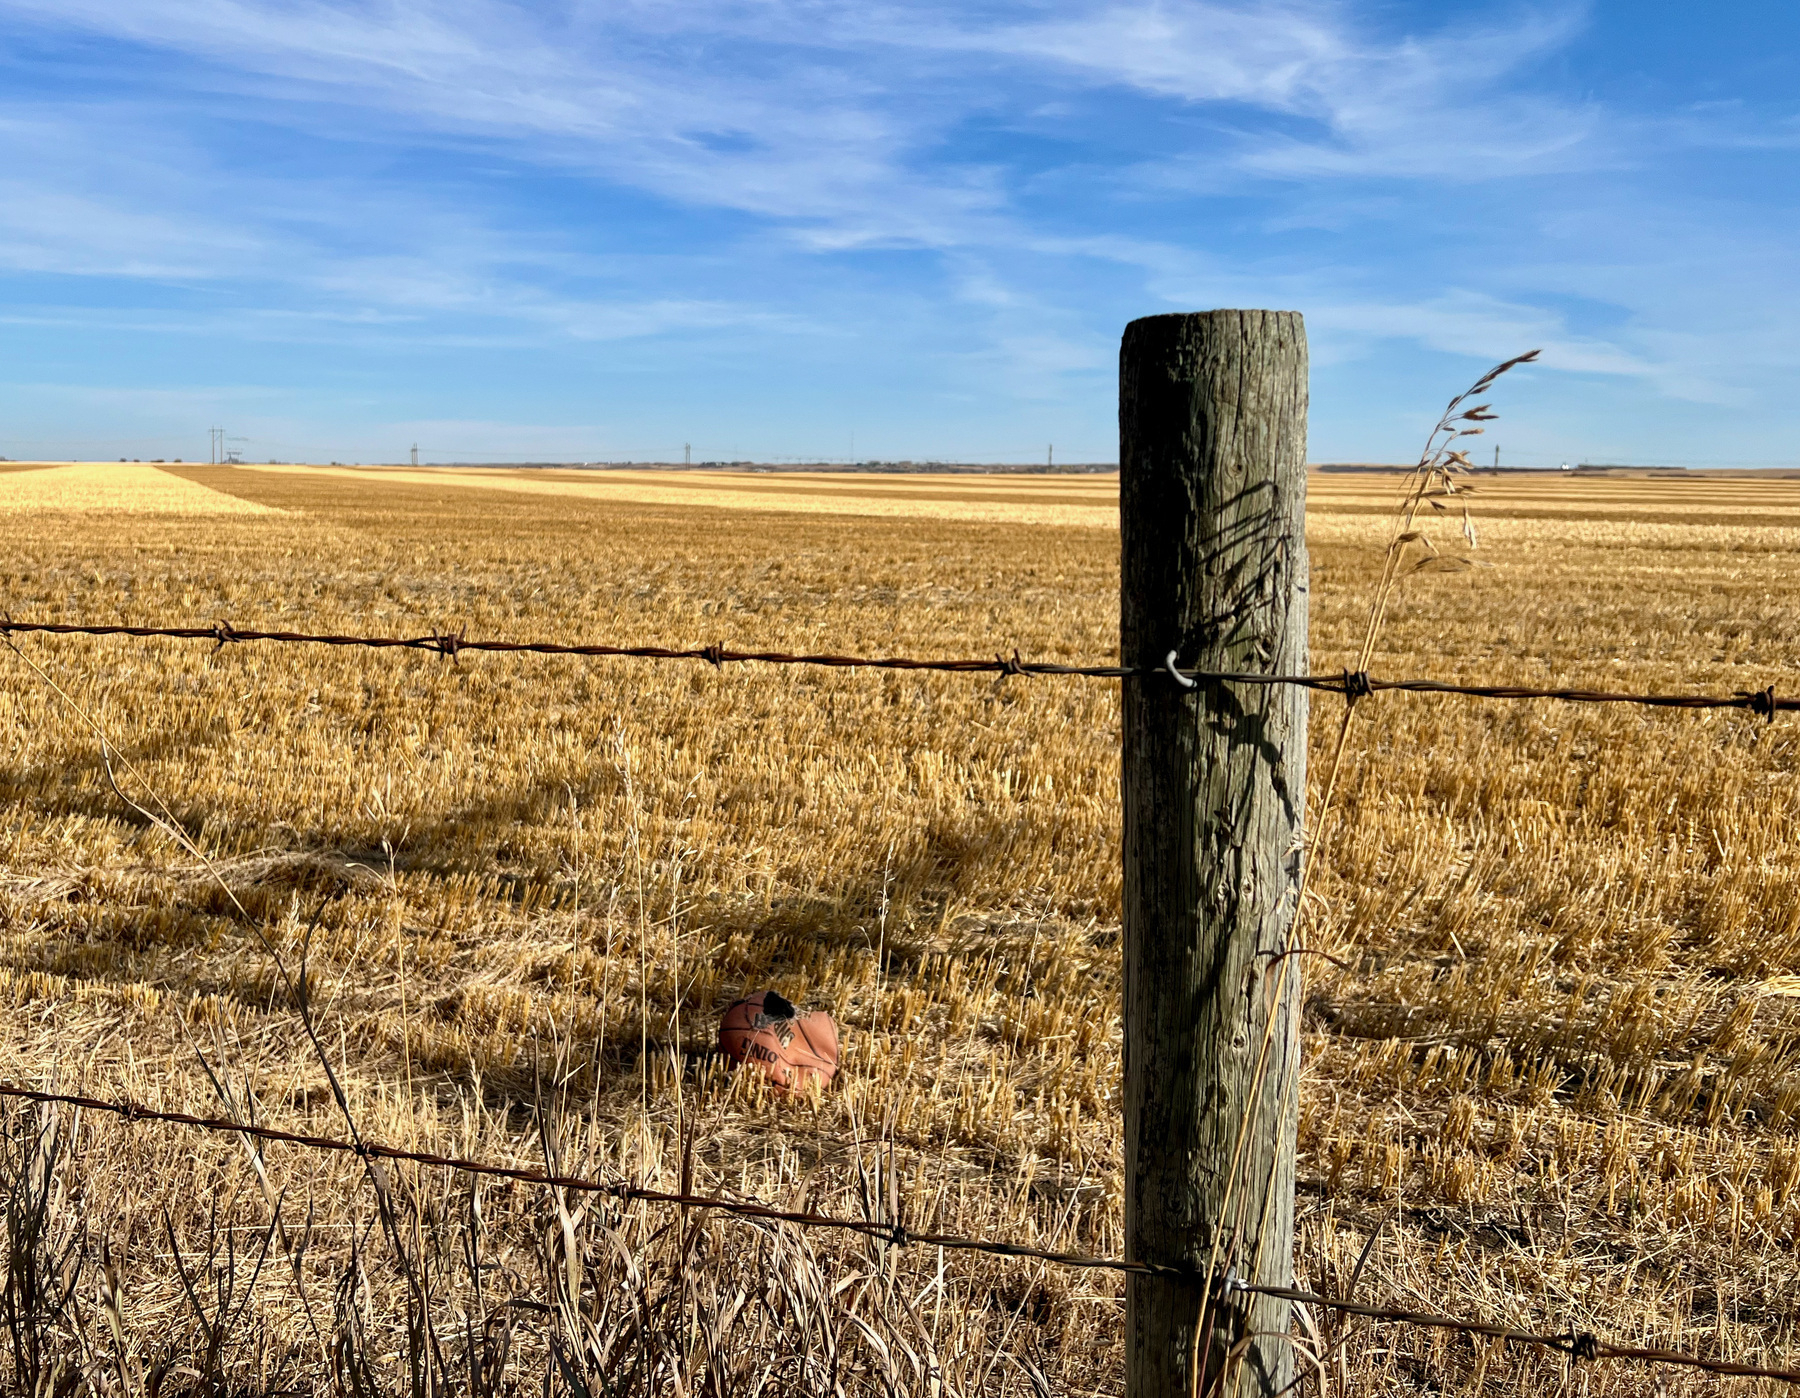 A fence post in the foreground with barbed wire fencing, with a harvested field in the background, and blue skies with a few clouds.